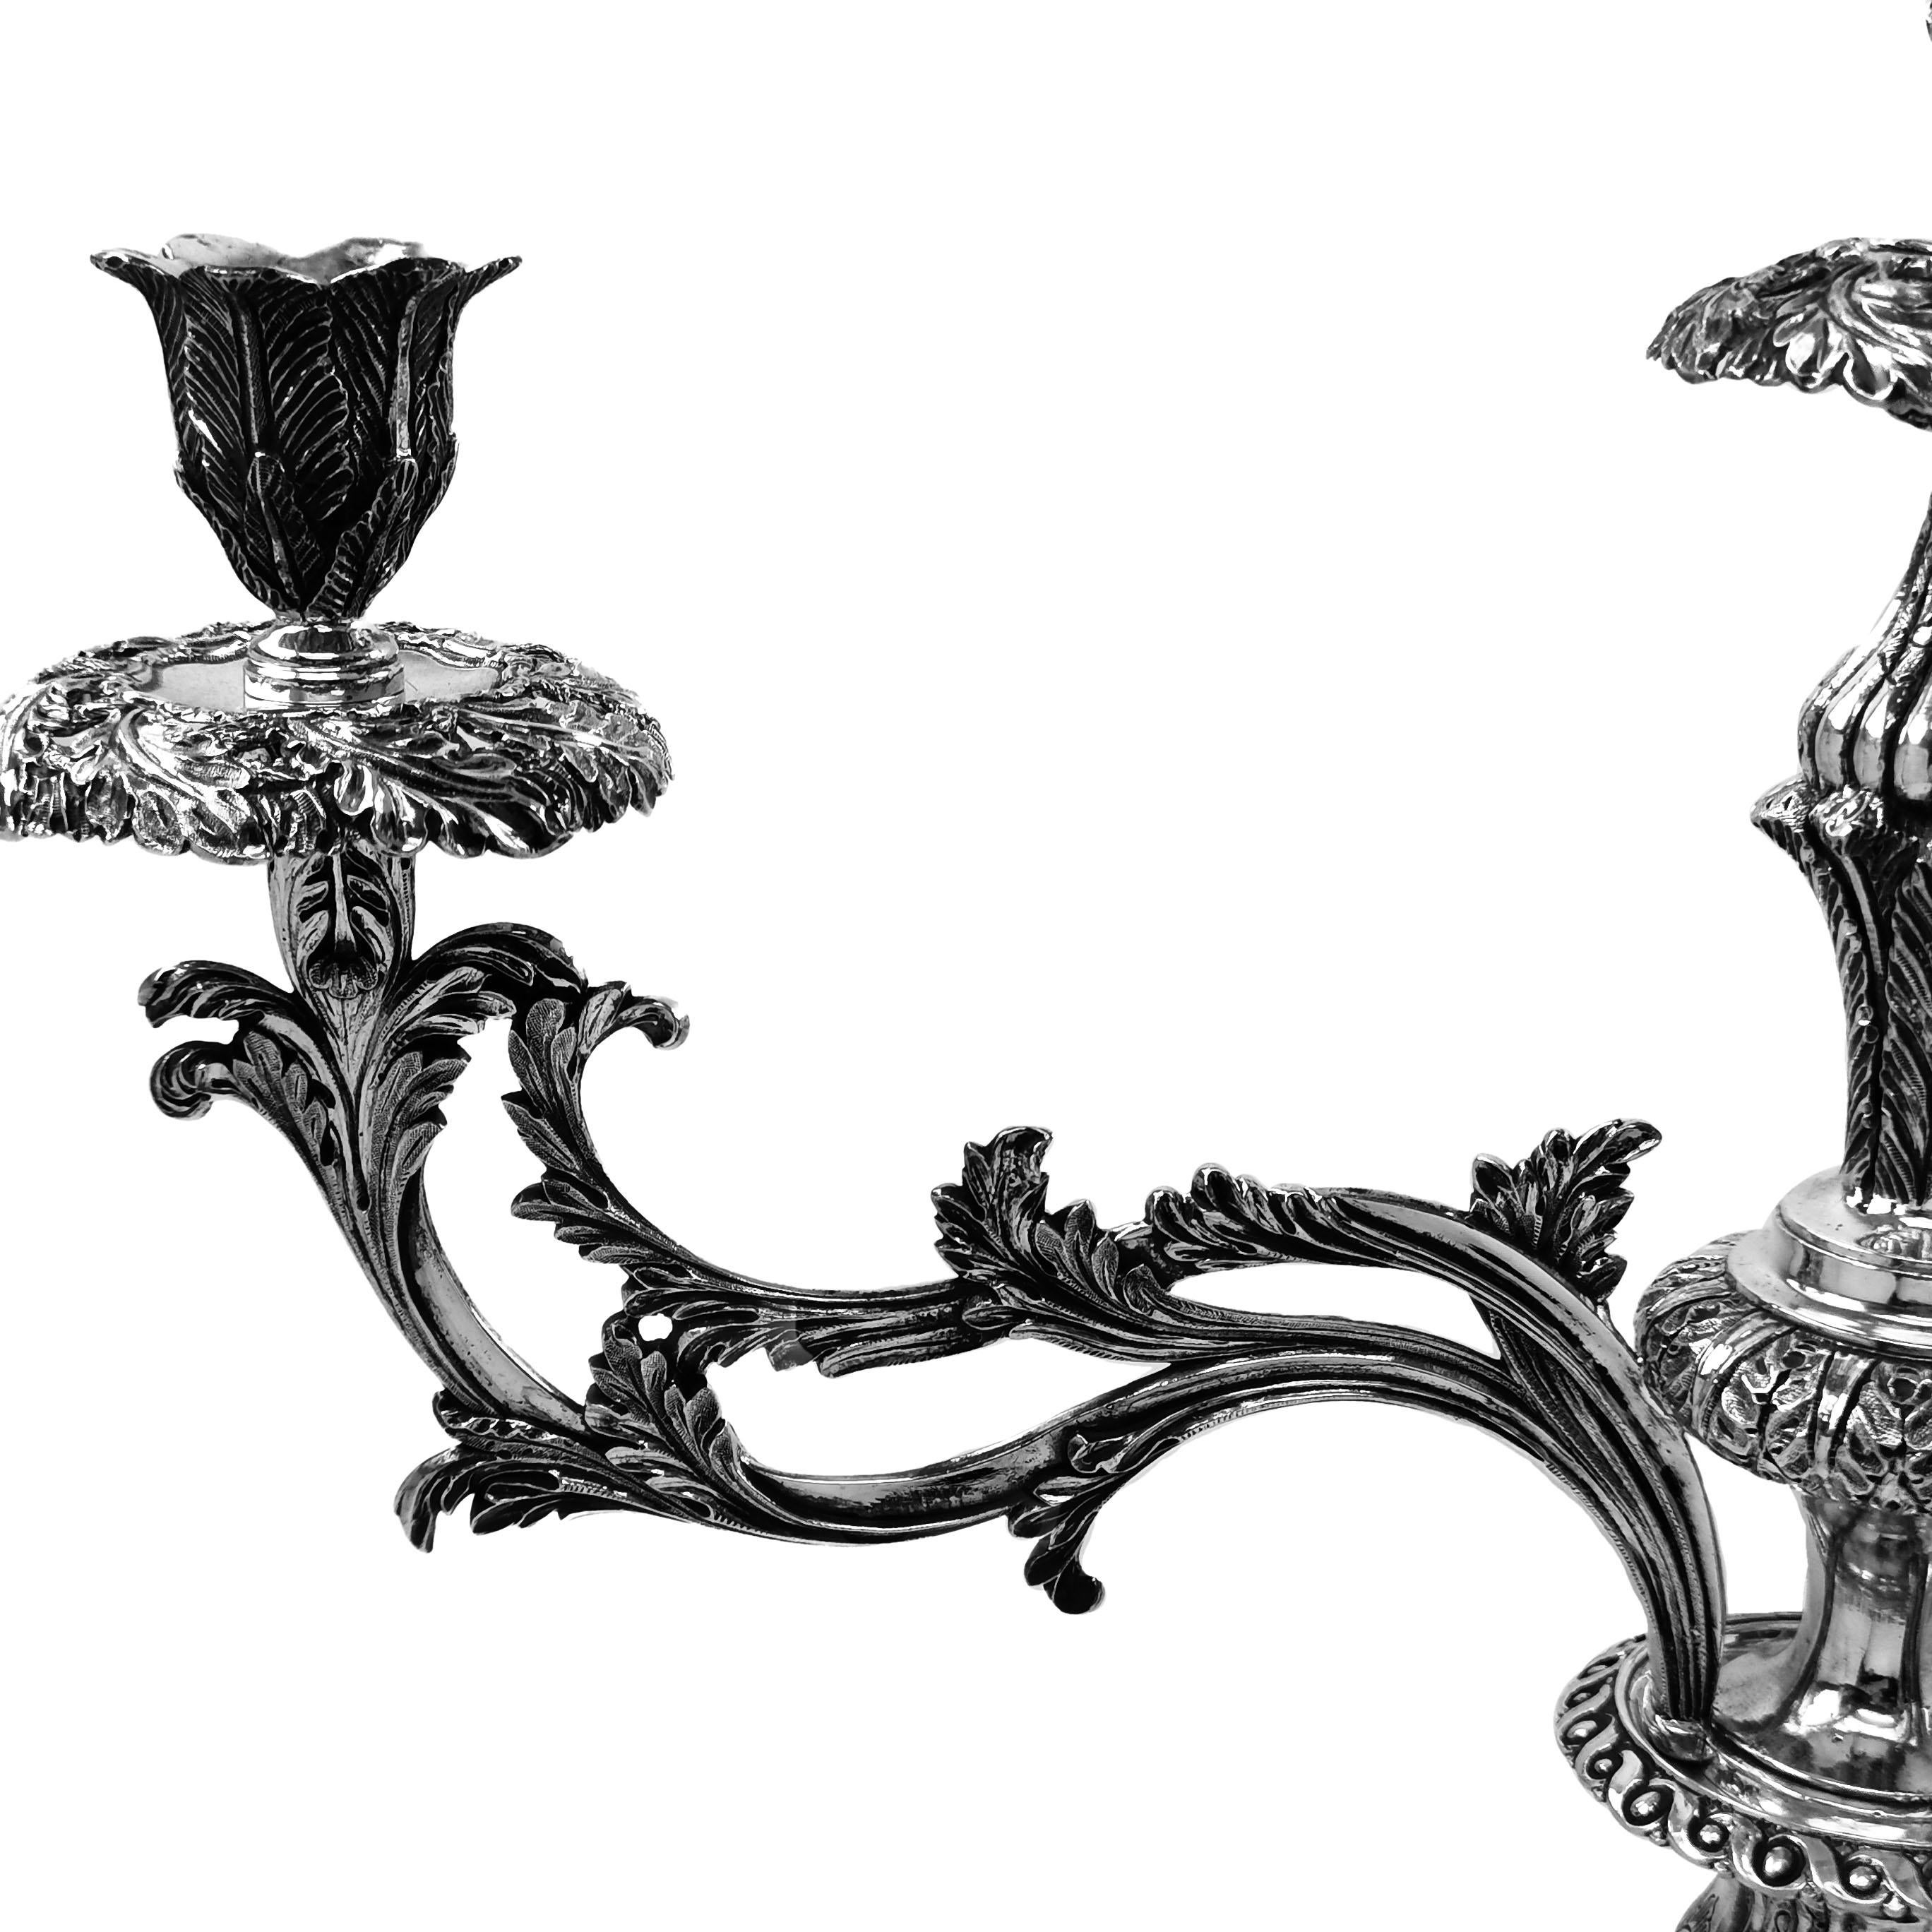 Rare Pair of Antique Portuguese Silver Candelabra c. 1800 19th Candle Holders For Sale 1